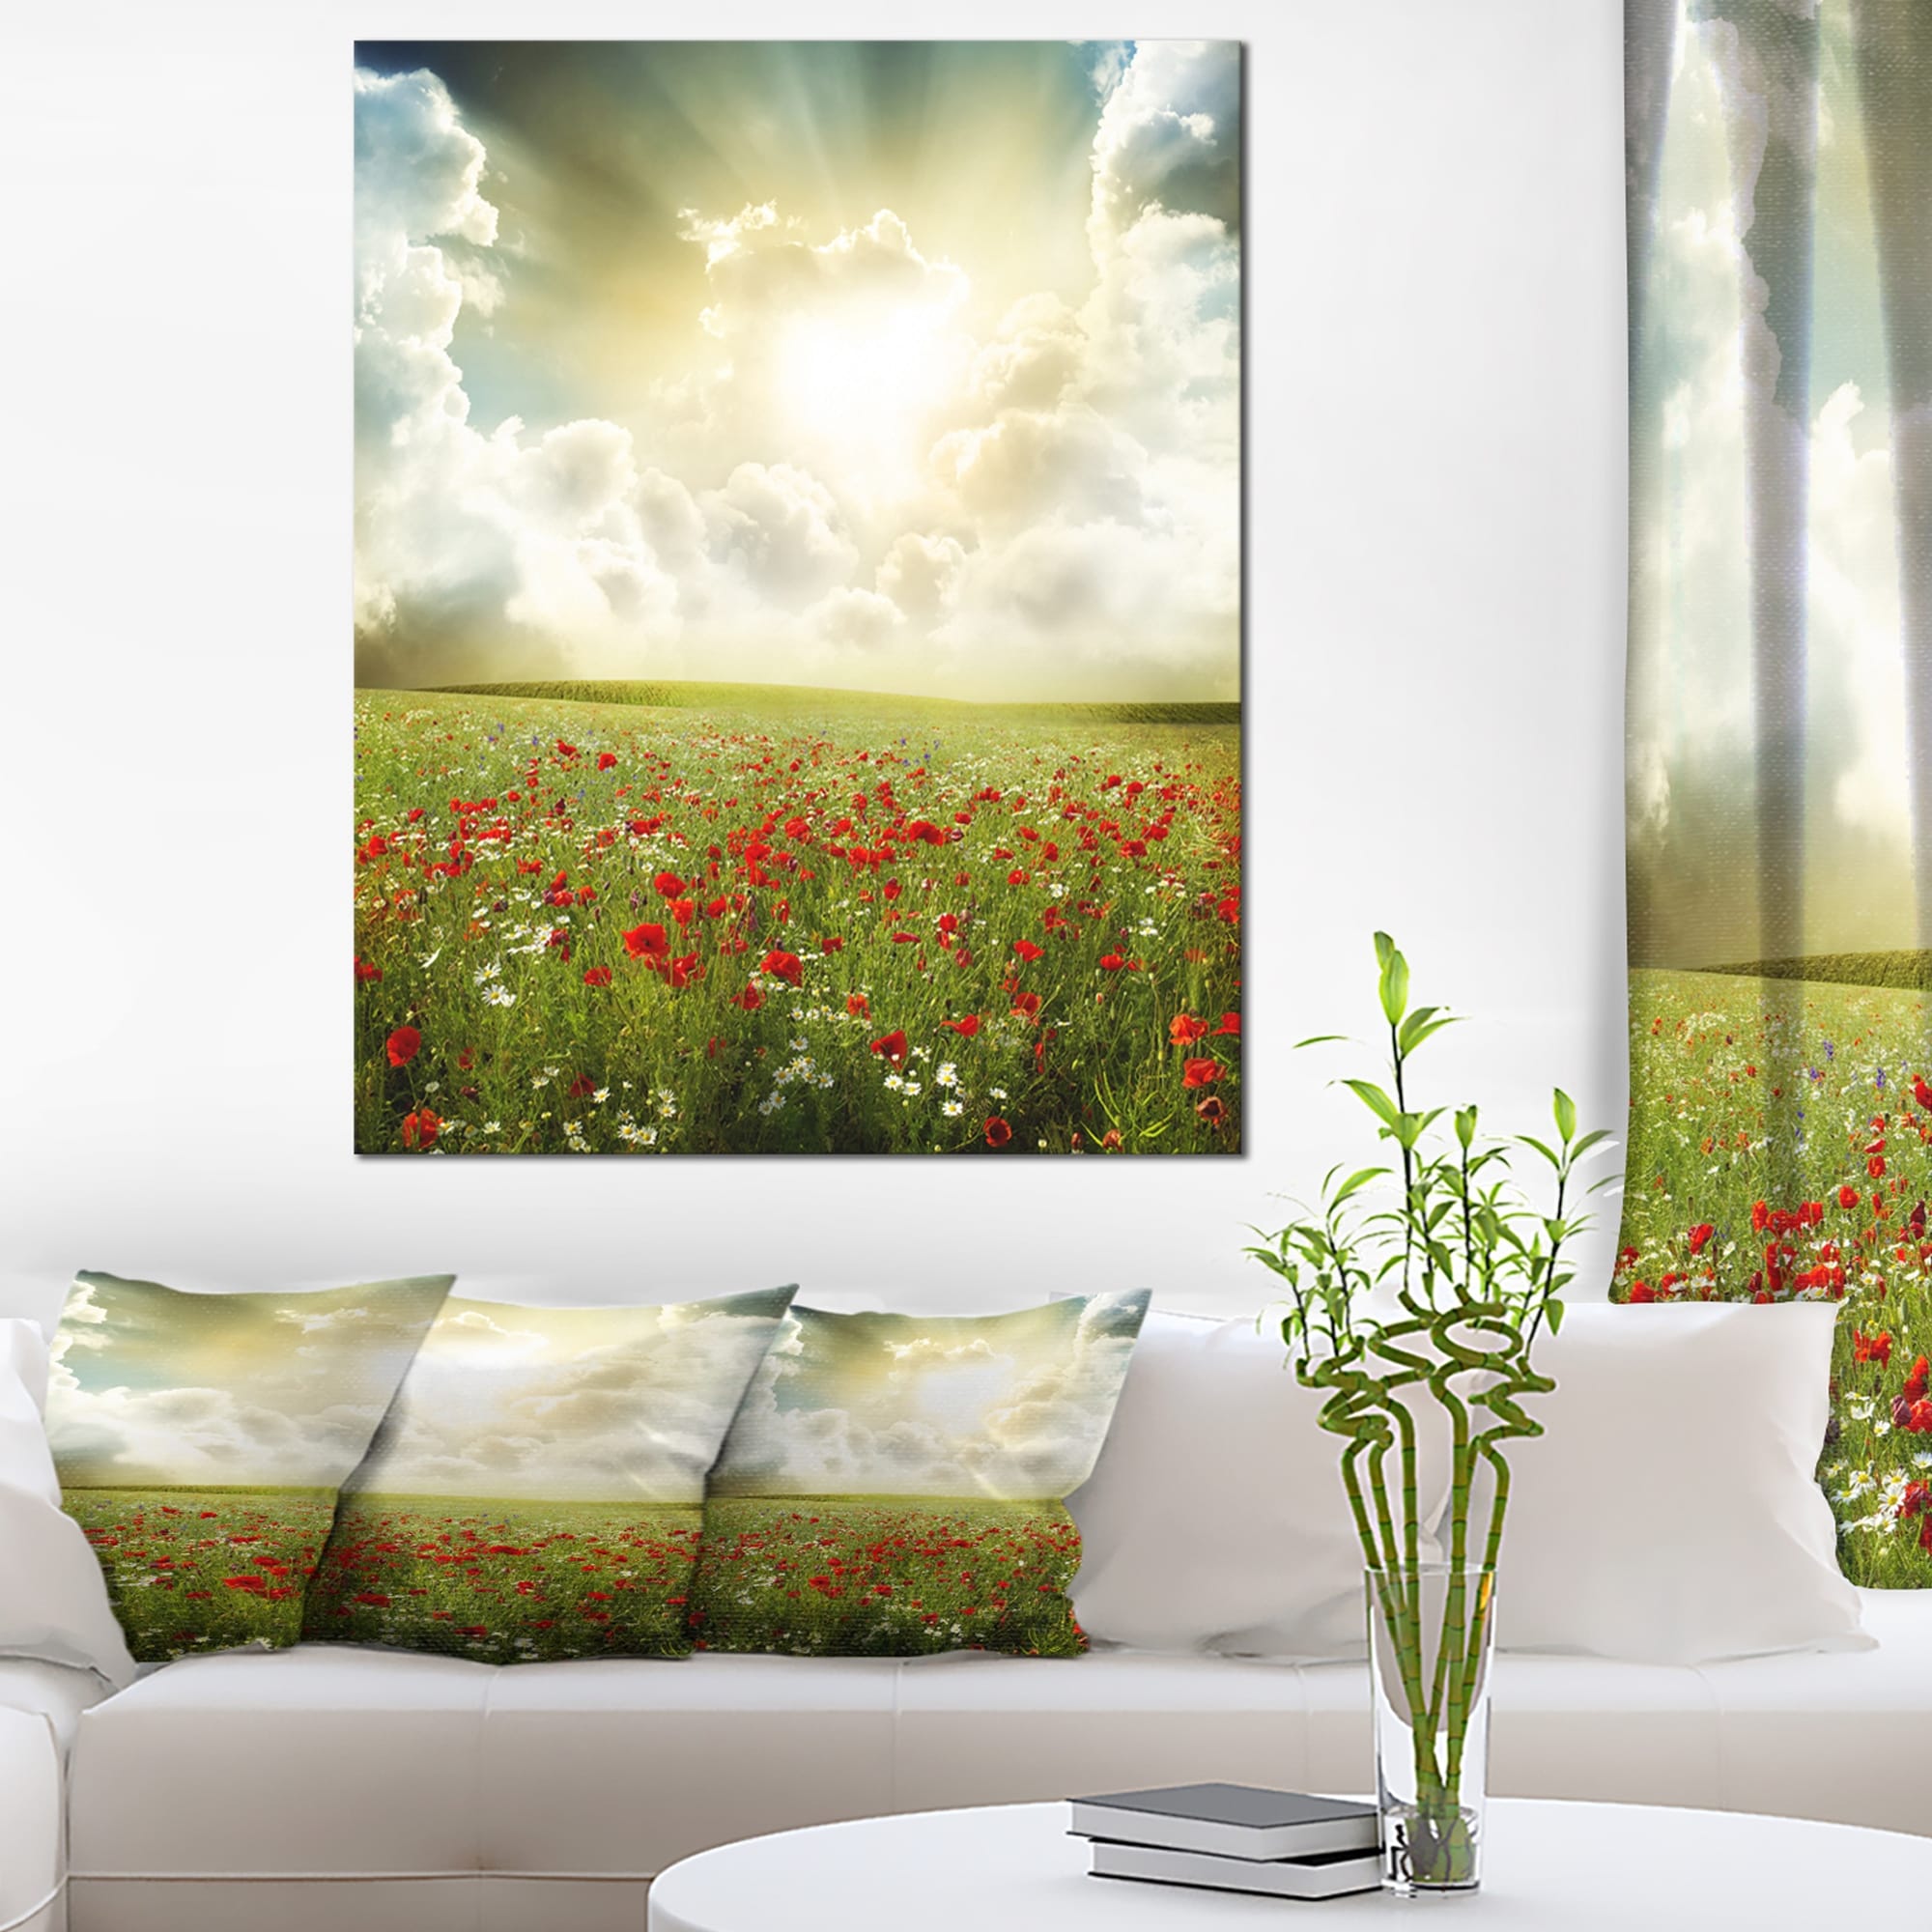 https://ak1.ostkcdn.com/images/products/is/images/direct/0919956bfcd55f12b29ce418b8303f2dfd15a3e4/Designart-%27Dramatic-Sky-over-Poppy-Field%27-Extra-Large-Landscape-Canvas-Art.jpg